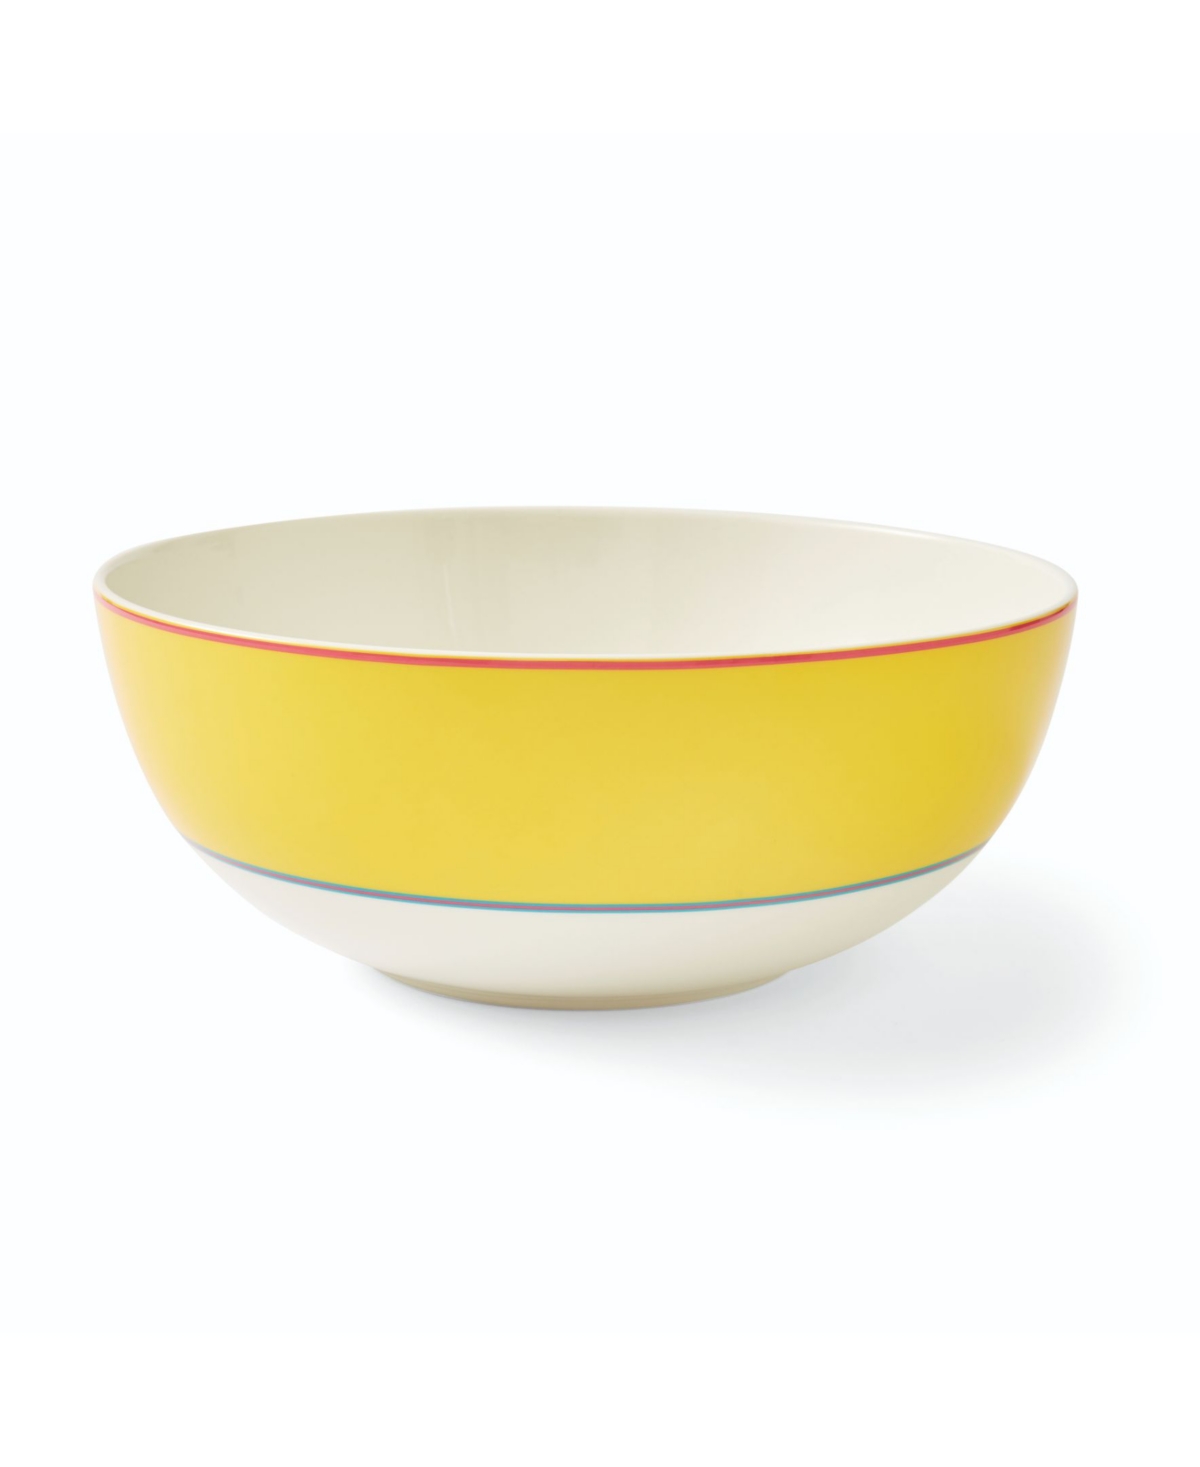 Kit Kemp For Spode Calypso Serving Bowl, 10" In Yellow